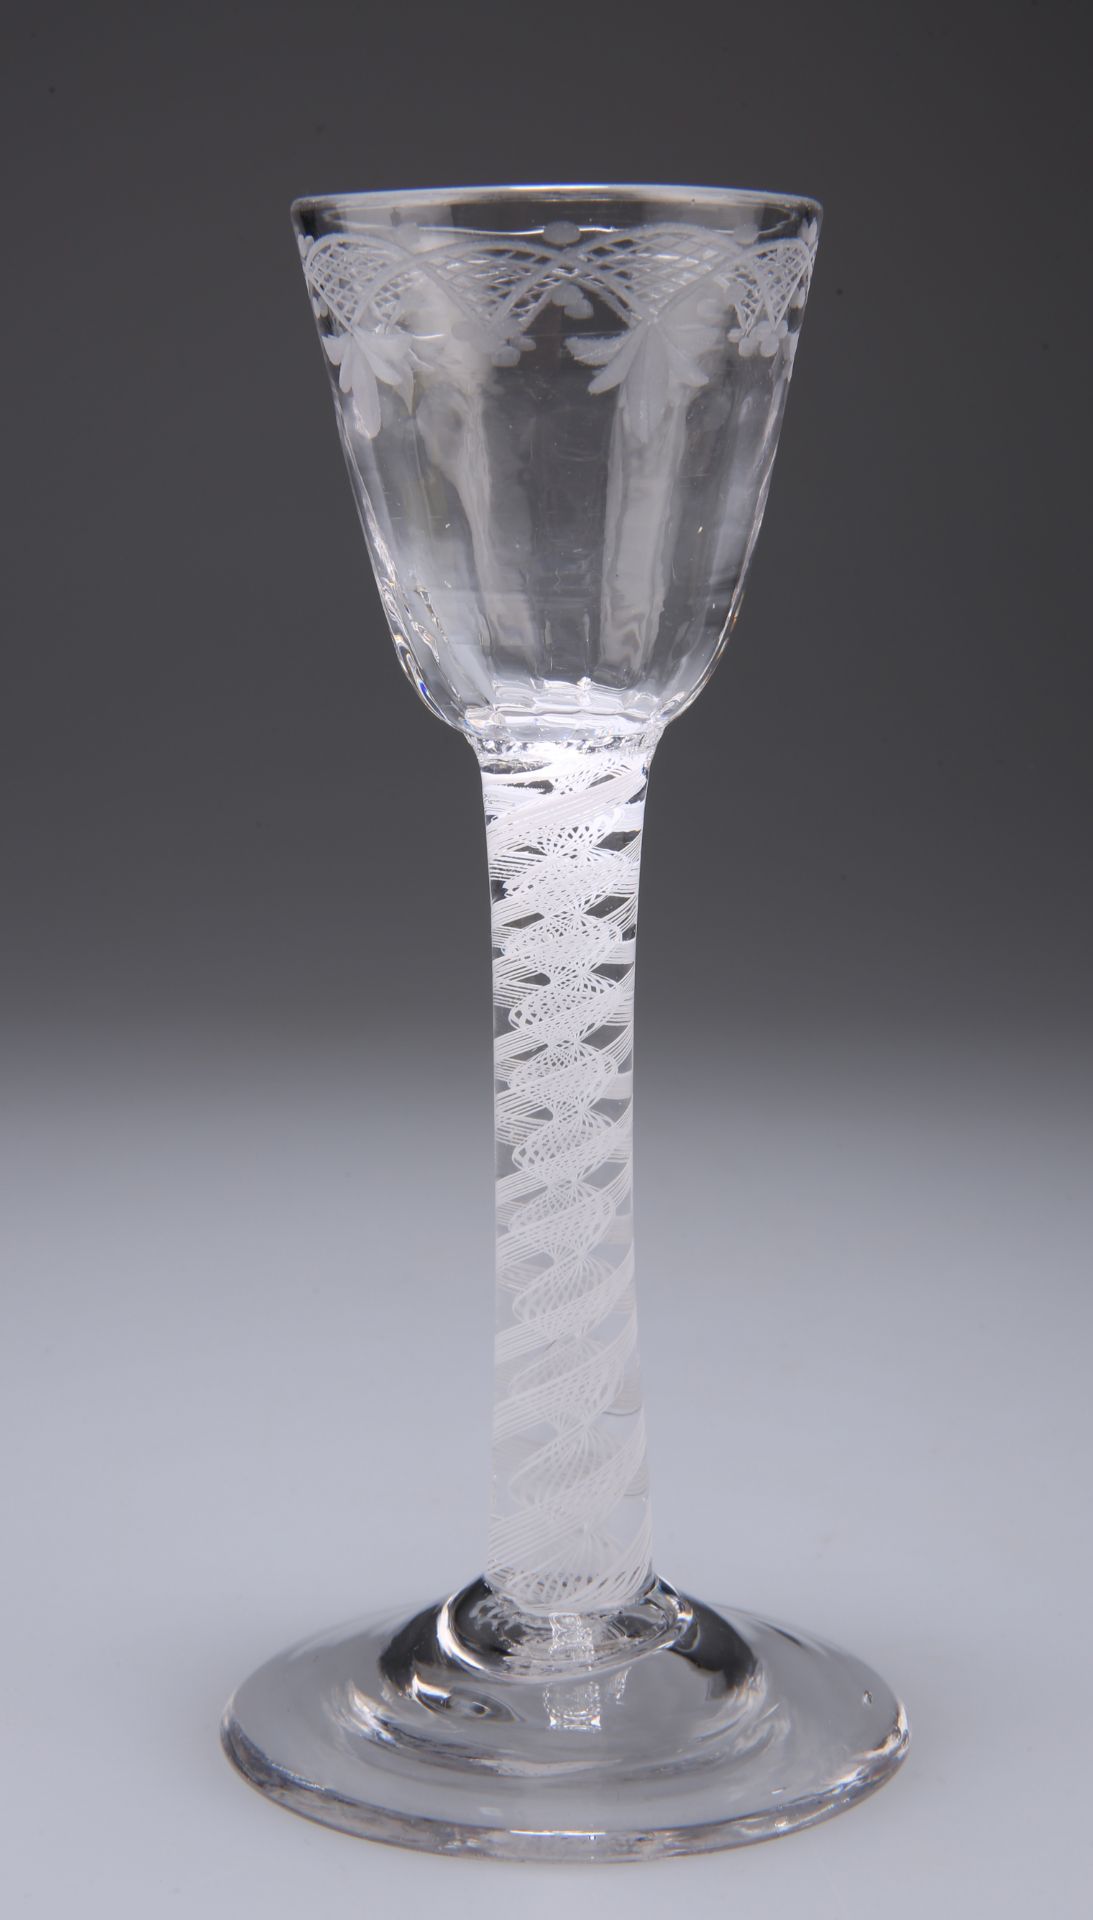 A CORDIAL GLASS